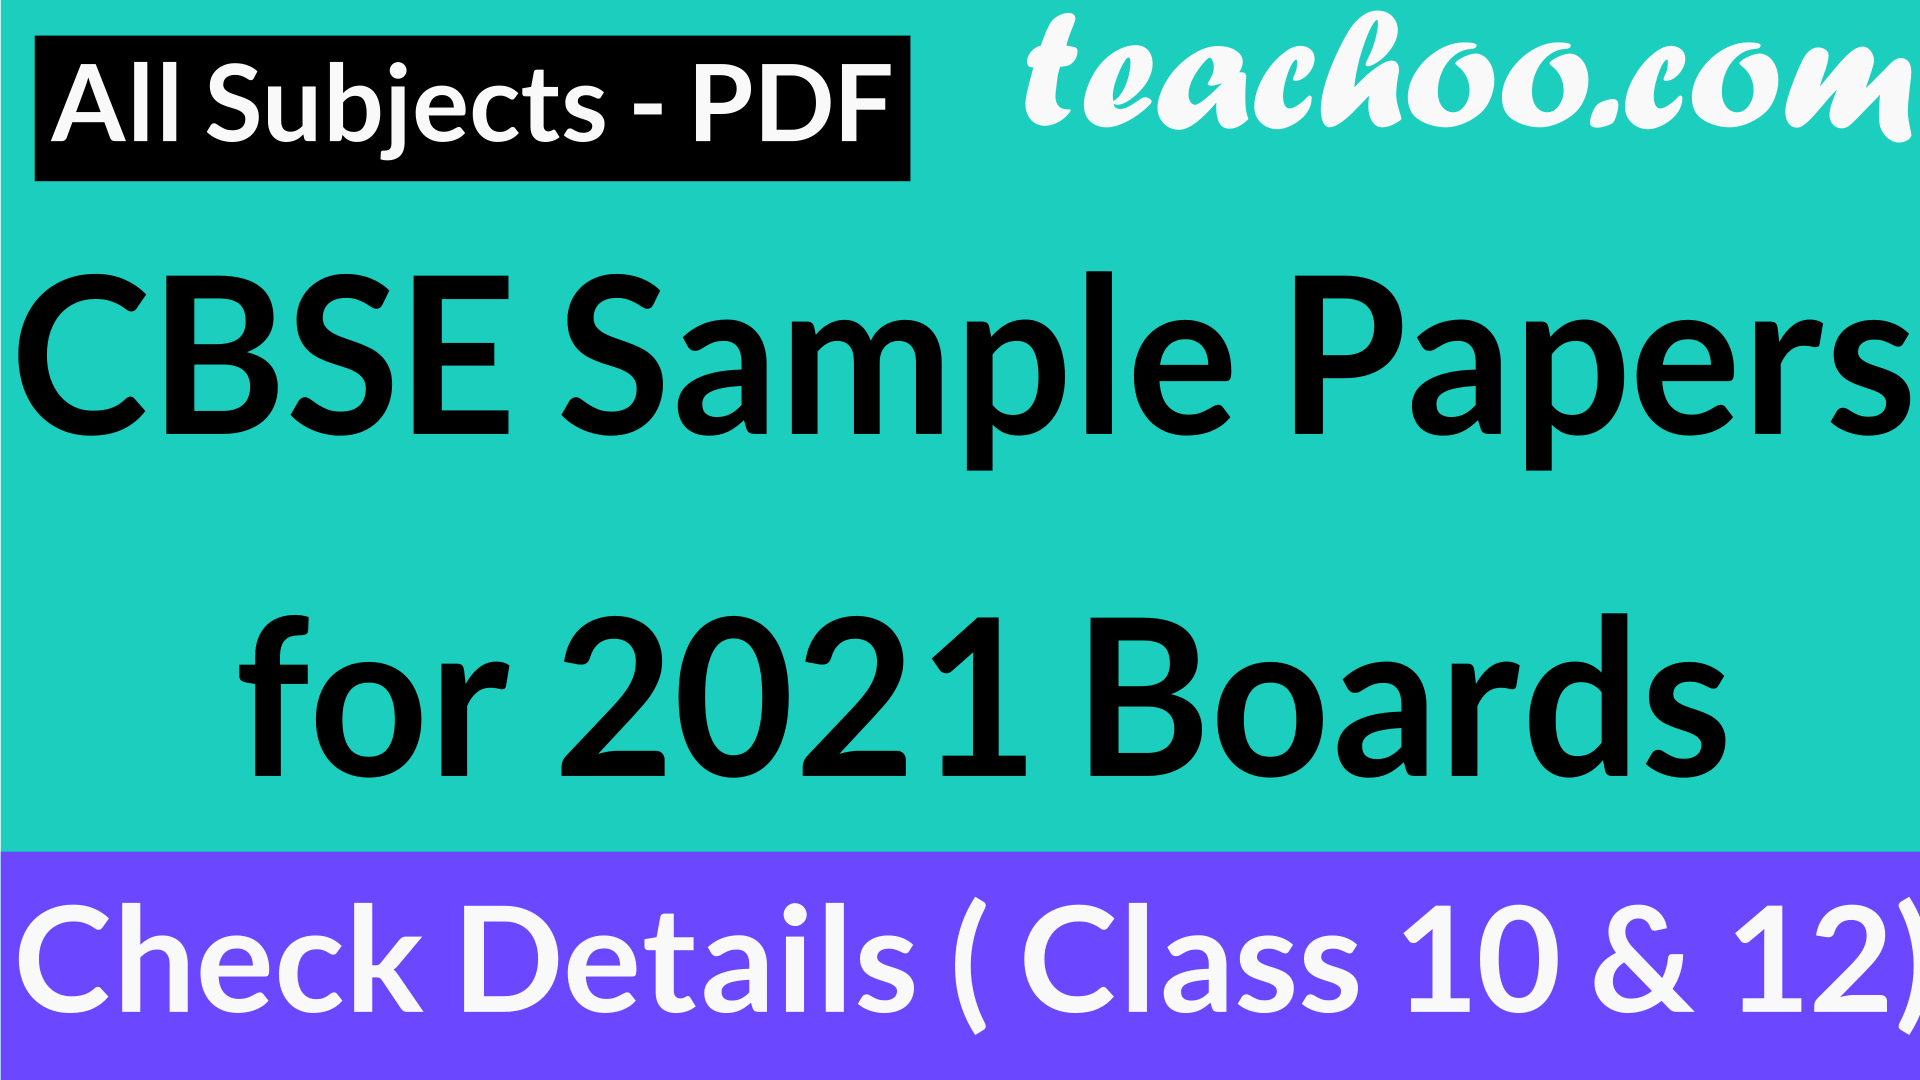 CBSE Sample Papers for 2021 Board Exams - Class 10 & 12